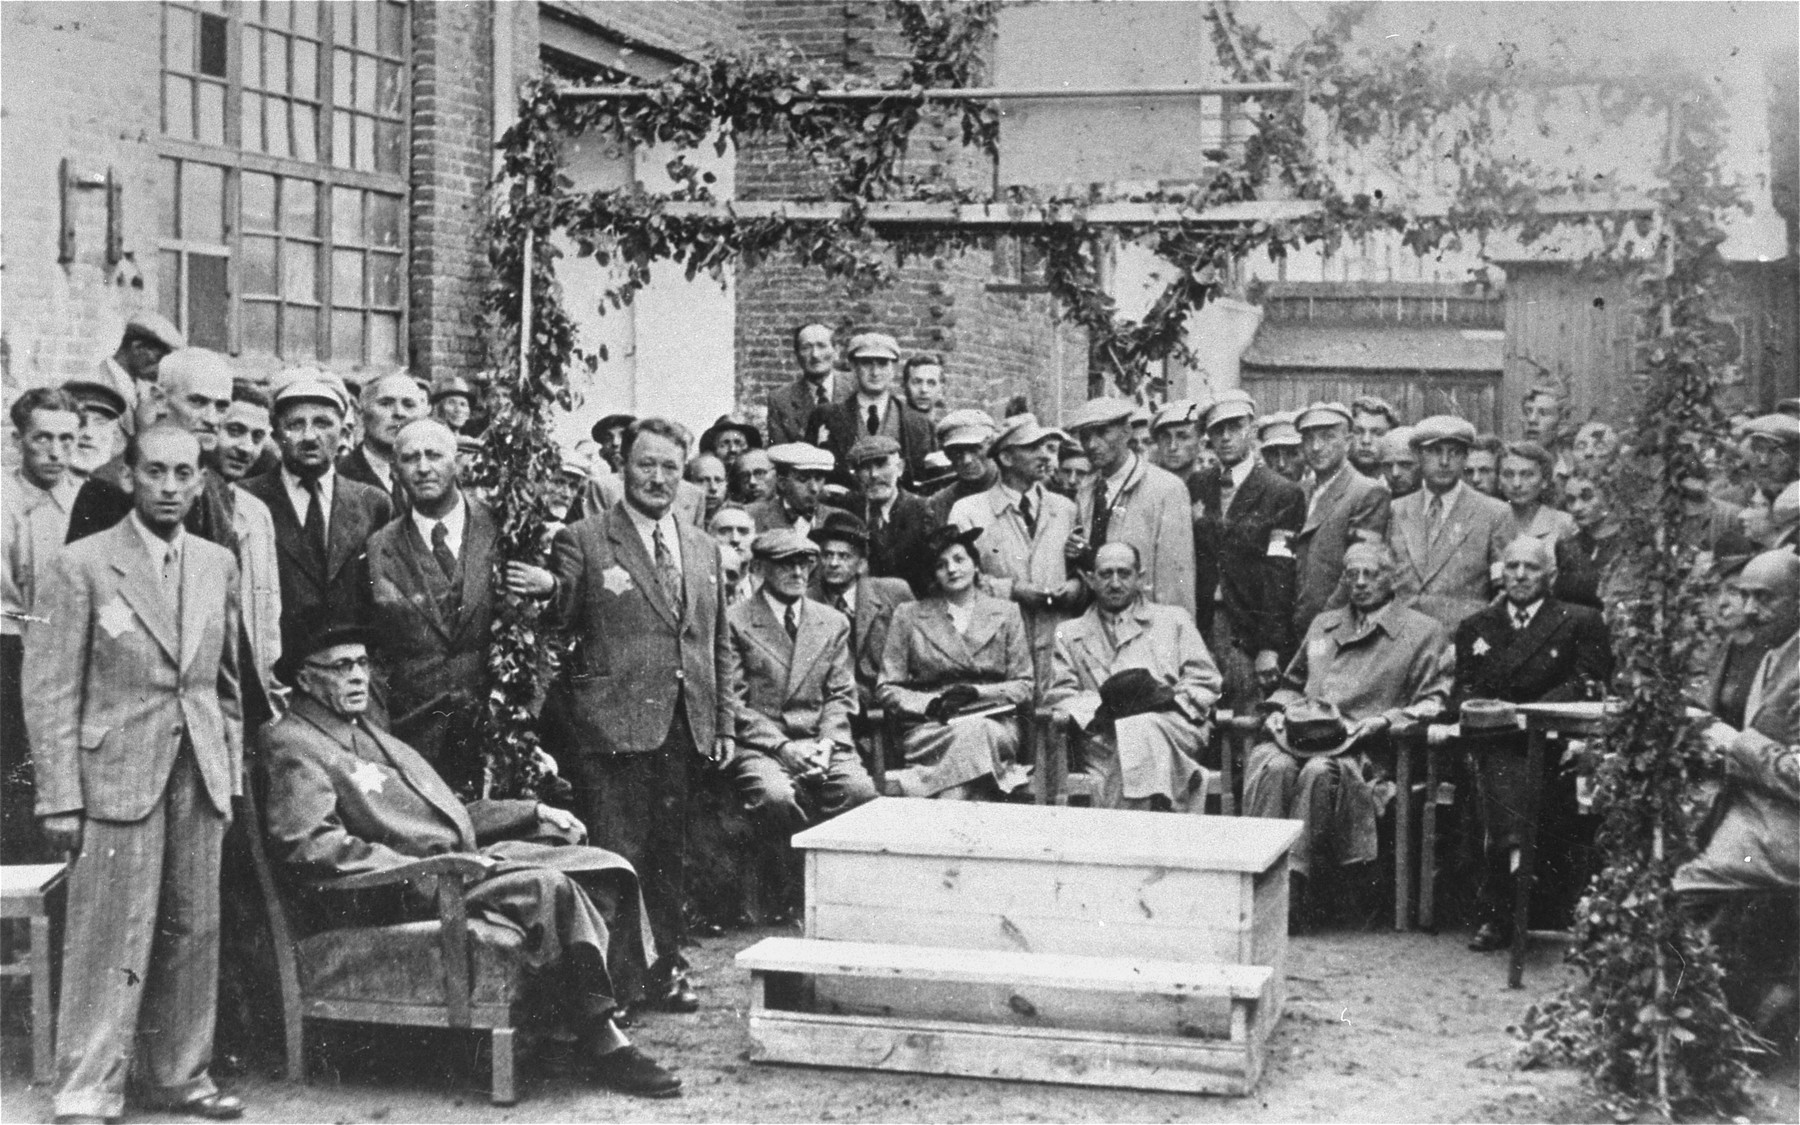 Mordechai Chaim Rumkowski (seated at the left) attends a public ceremony in the Lodz ghetto.

Among those pictured are: Baruch Praszker (standing behind Rumkowski), Stefania Dawidowicz (seated in the center, wearing a hat), Dr. Leon Szykier (seated next to Dawidowicz), Jozef Rumkowski (seated next to Szykier), Leon Rozenblat (far right).  All others are members of the ghetto police.